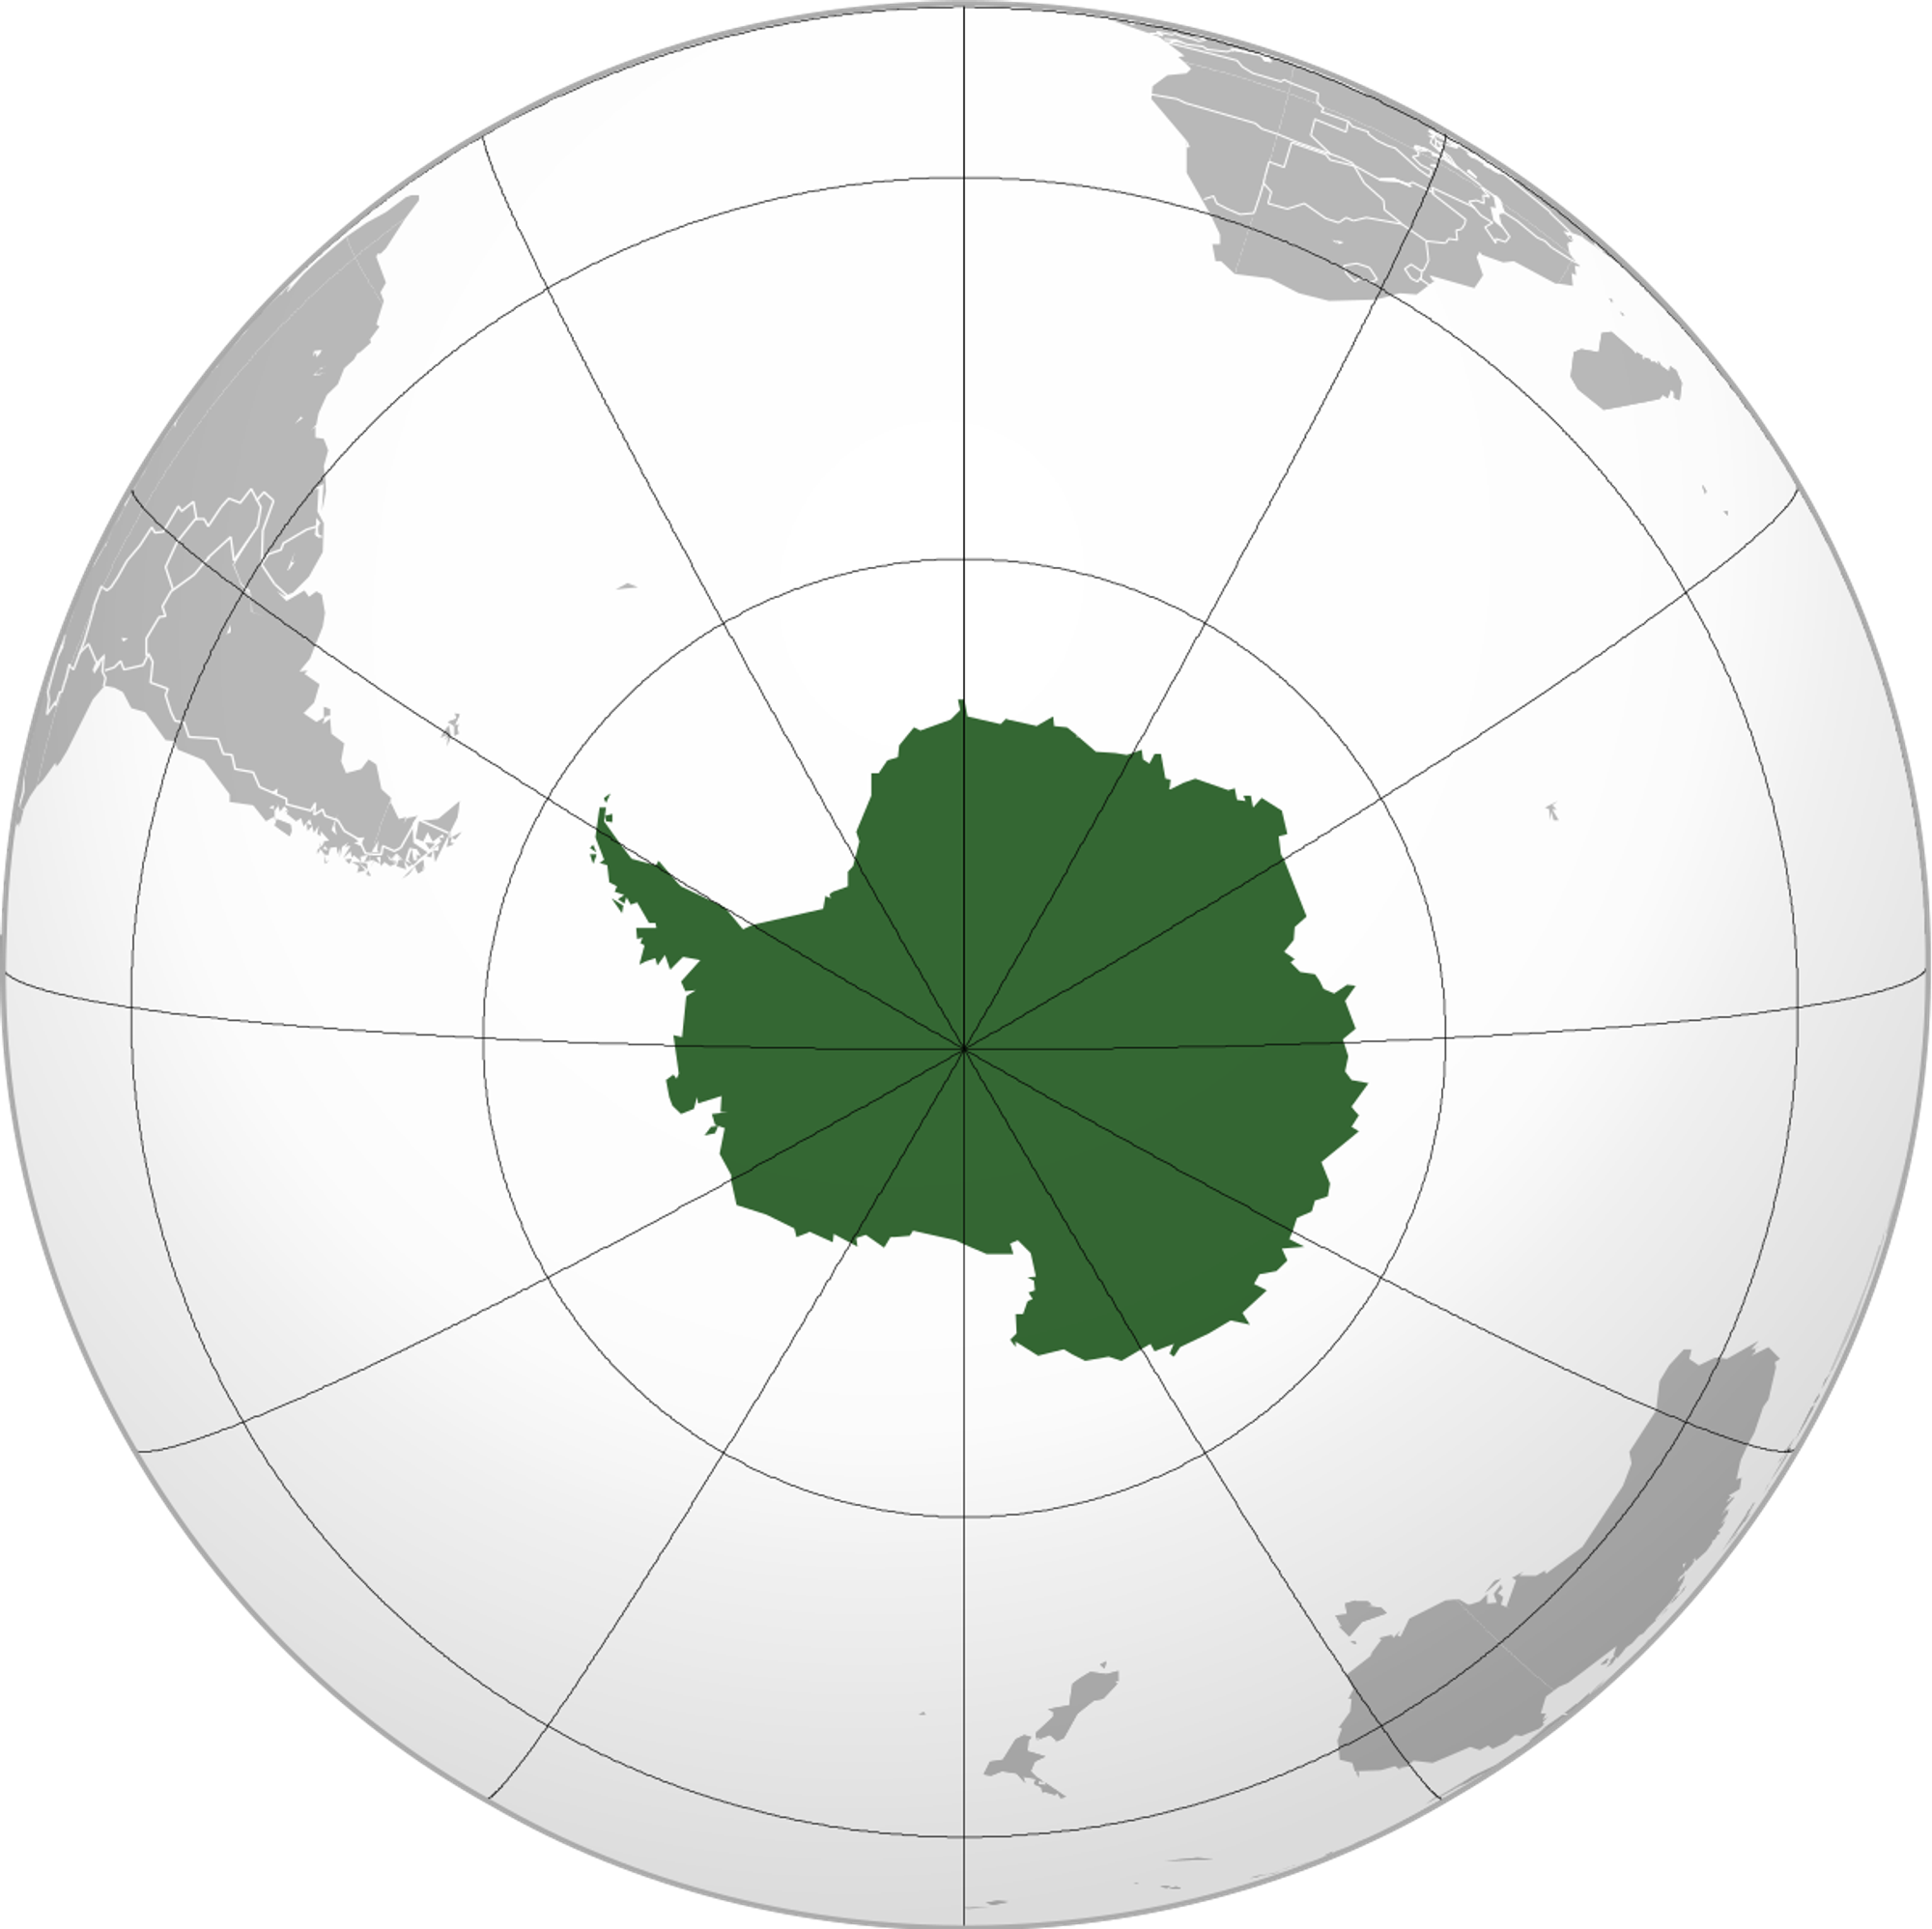 https://upload.wikimedia.org/wikipedia/commons/thumb/f/f2/Antarctica_%28orthographic_projection%29.svg/1200px-Antarctica_%28orthographic_projection%29.svg.png